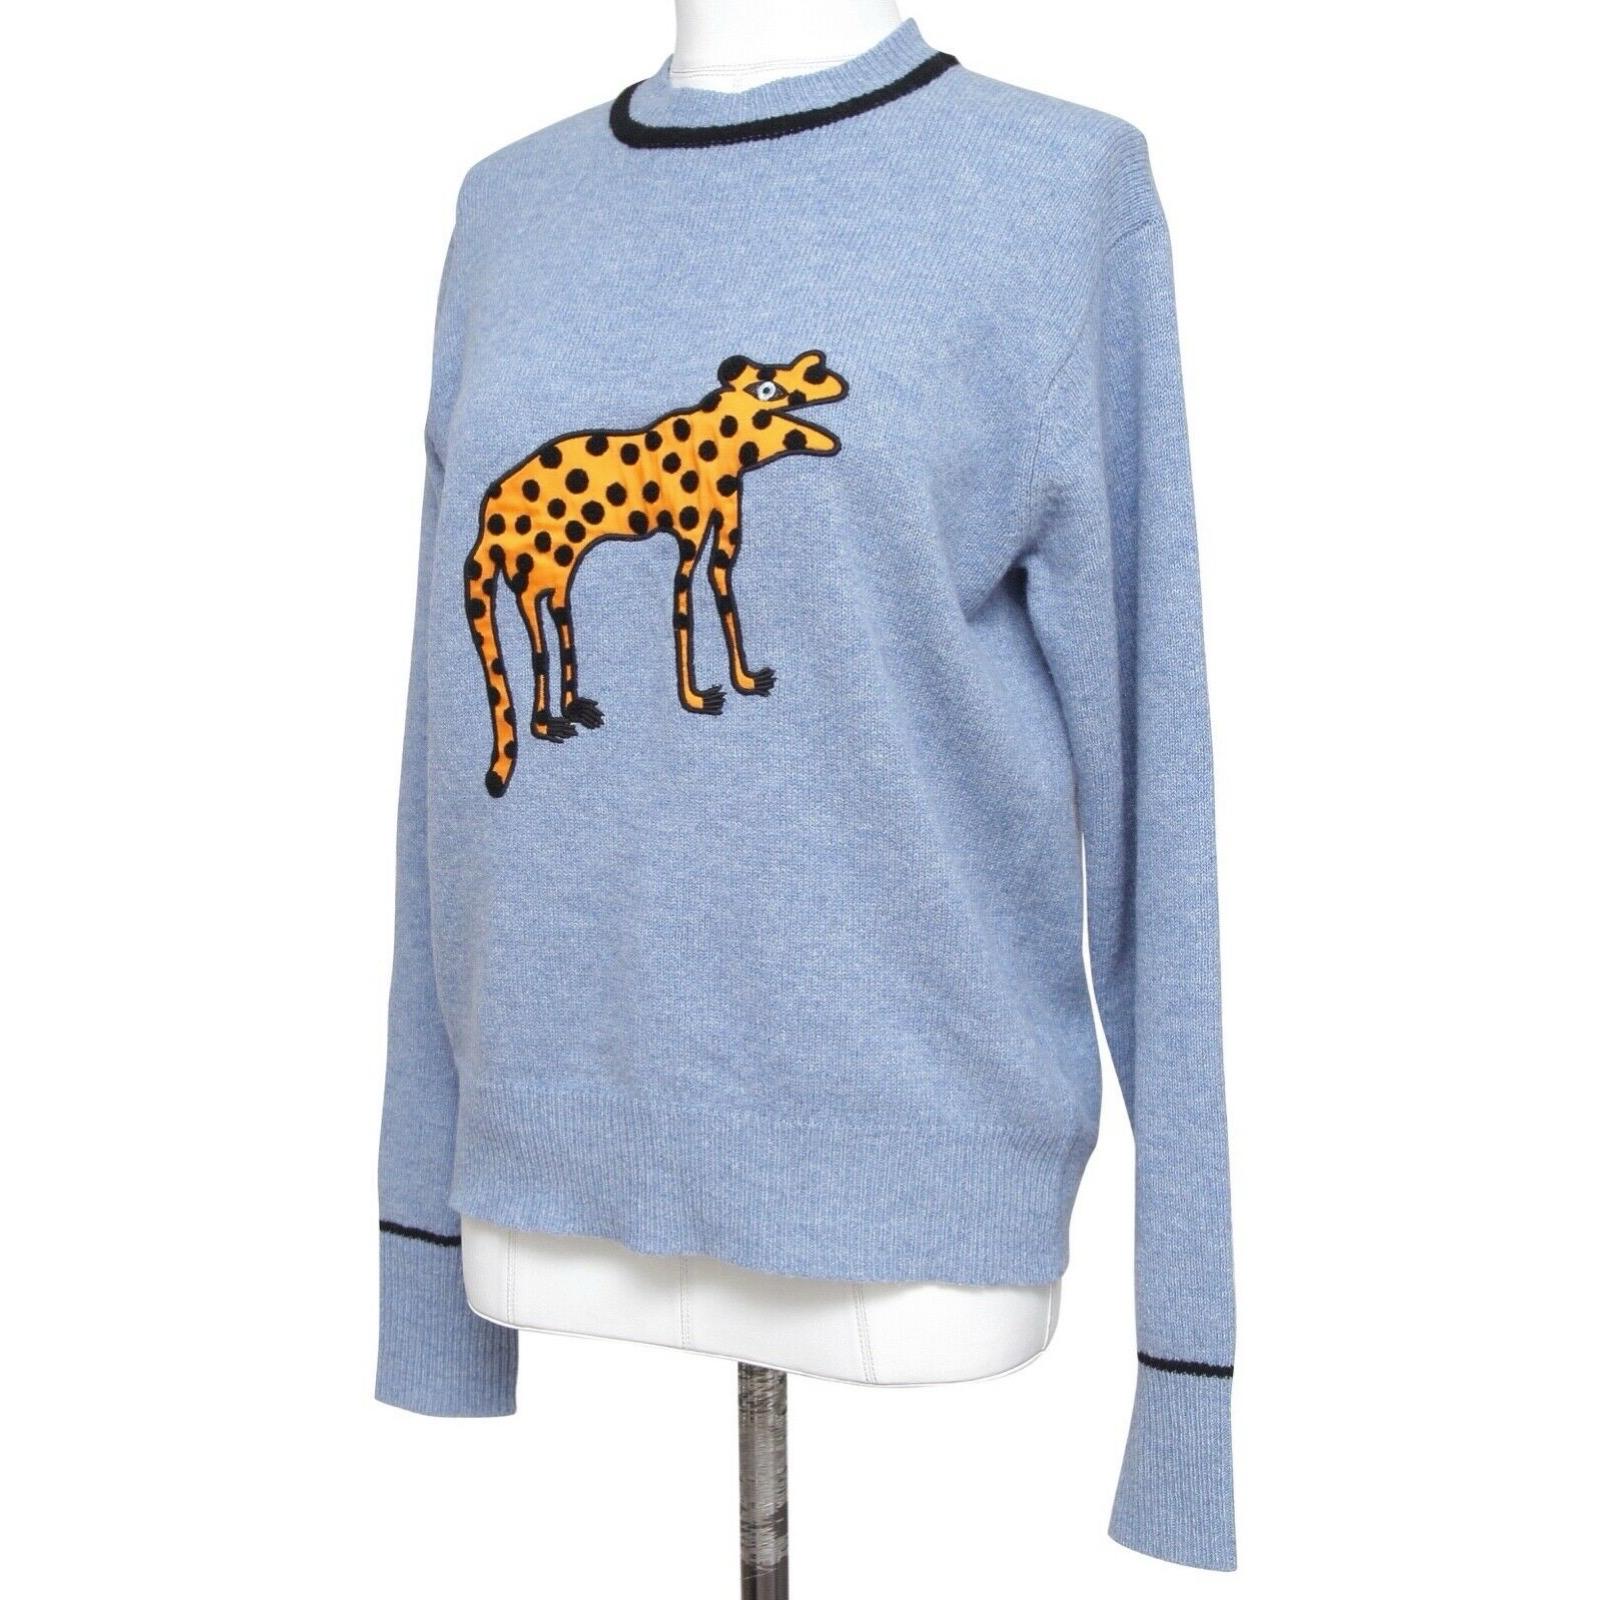 GUARANTEED AUTHENTIC VICTORIA VICTORIA BECKHAM ANIMAL SWEATER


Details:
o Blue wool long sleeve sweater.
o Animal design.
o Crew neck.
o Ribbed edges.
o Black stripe around neckline and cuffs.

Material: 100% wool

Size: XS

Measurements